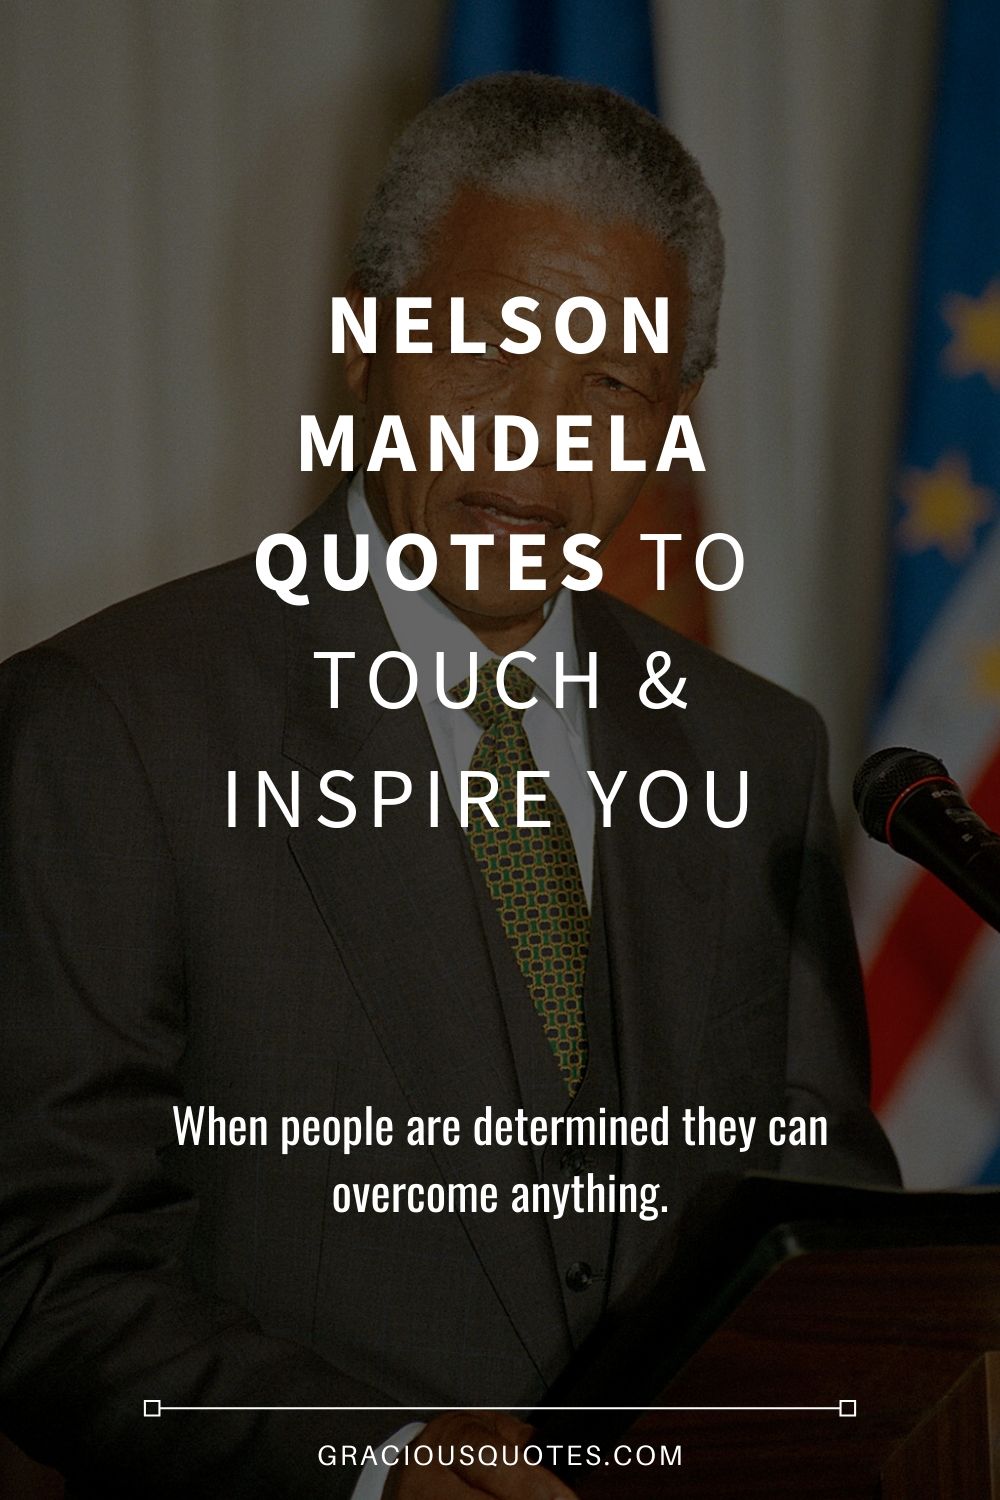 Nelson-Mandela-Quotes-to-Touch-Inspire-You-Gracious-Quotes